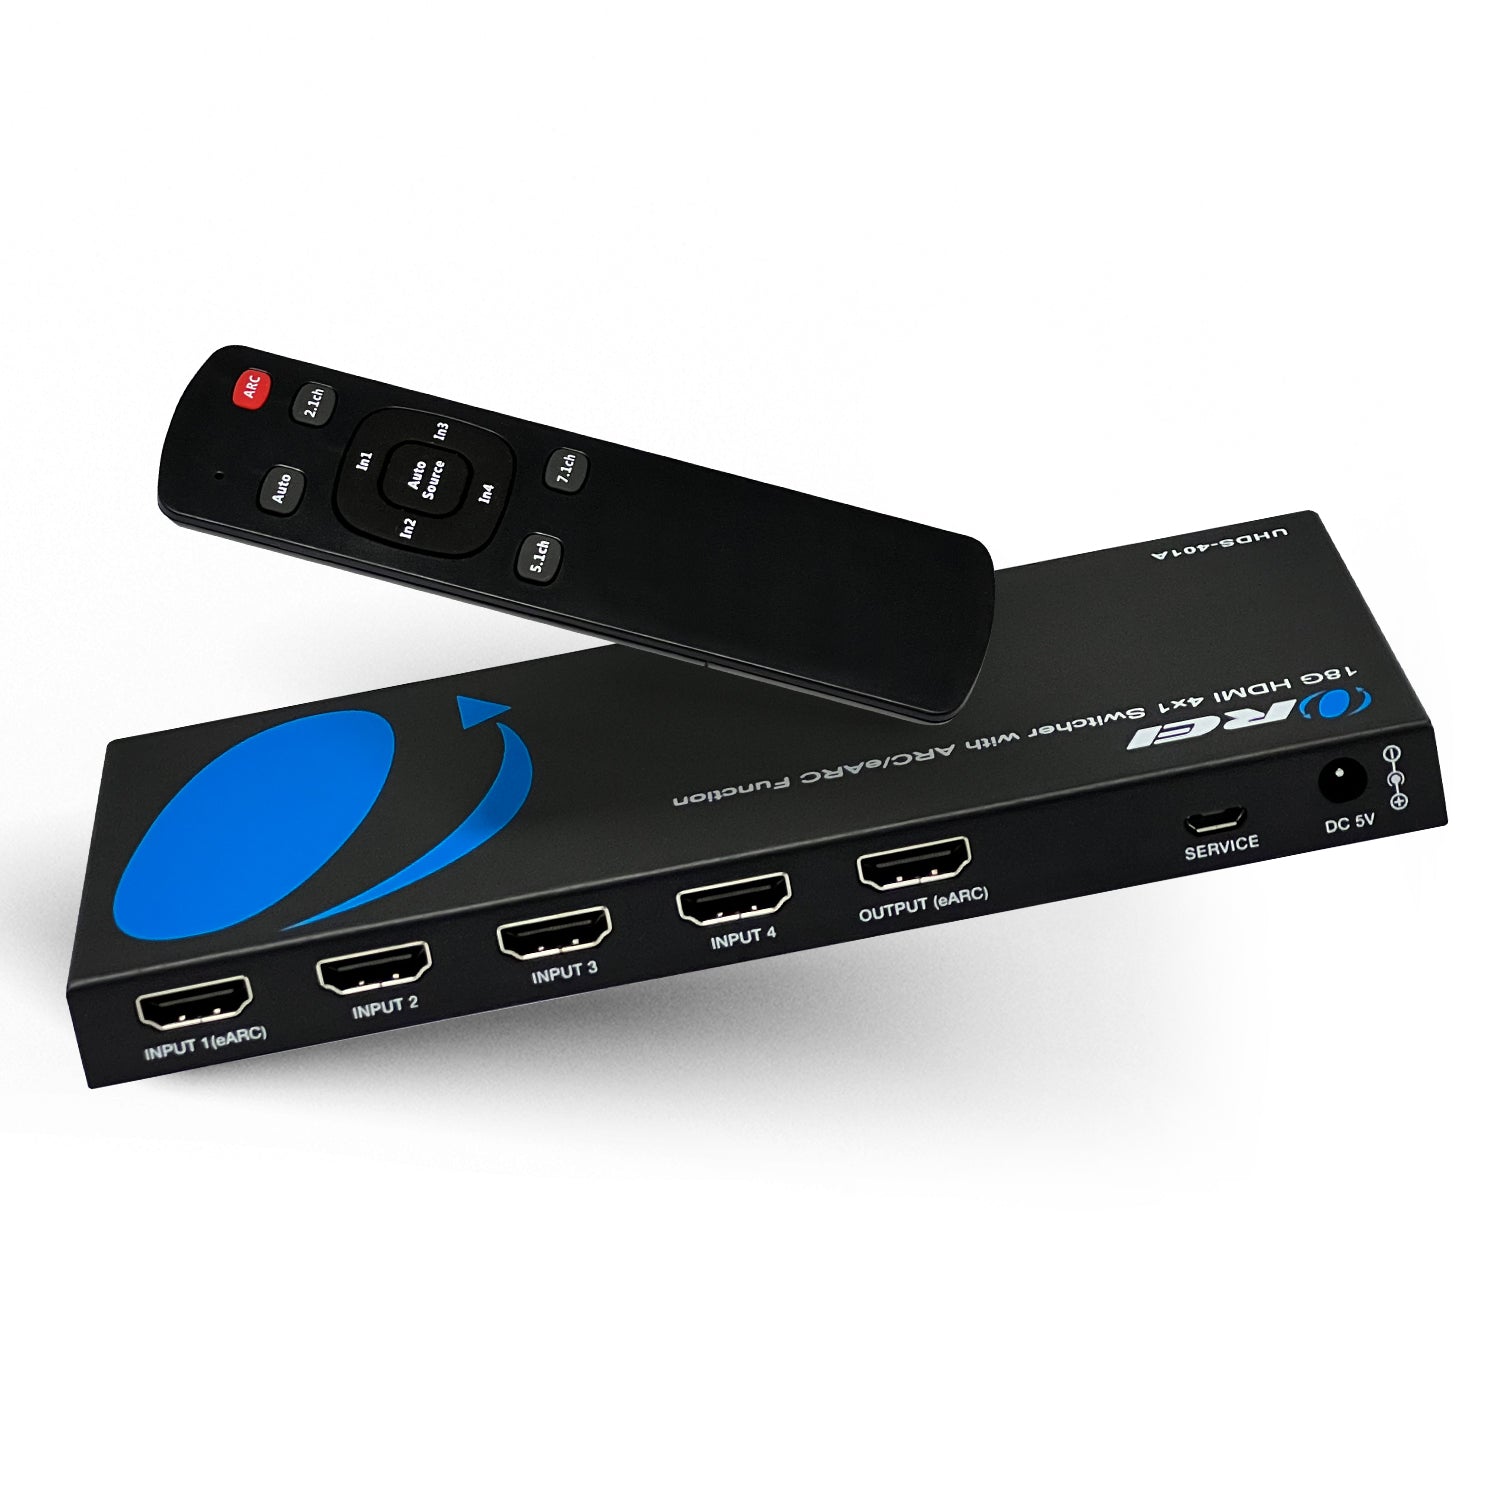  KVM USB Switch, 8 in 1 Out HDMI Switcher Box Support